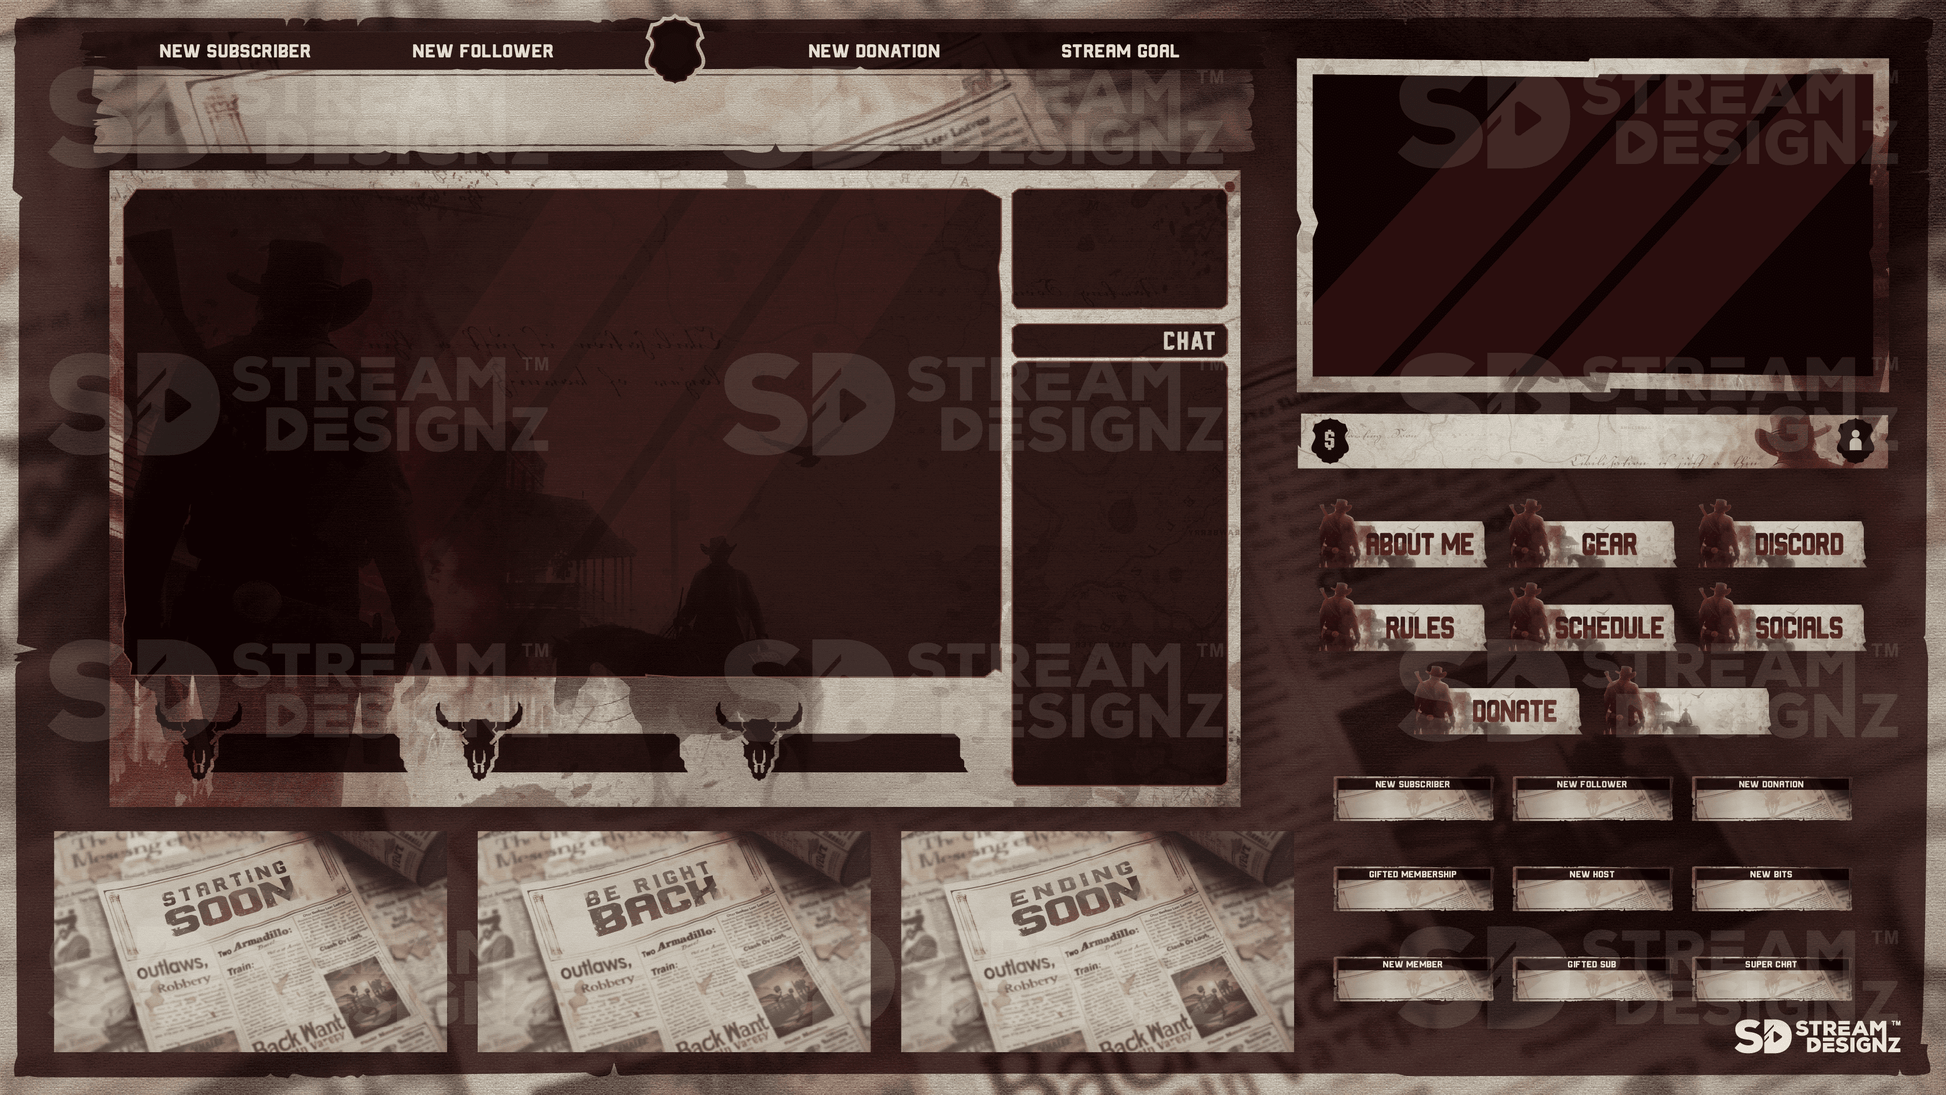 Ultimate stream package feature image outlaw stream designz